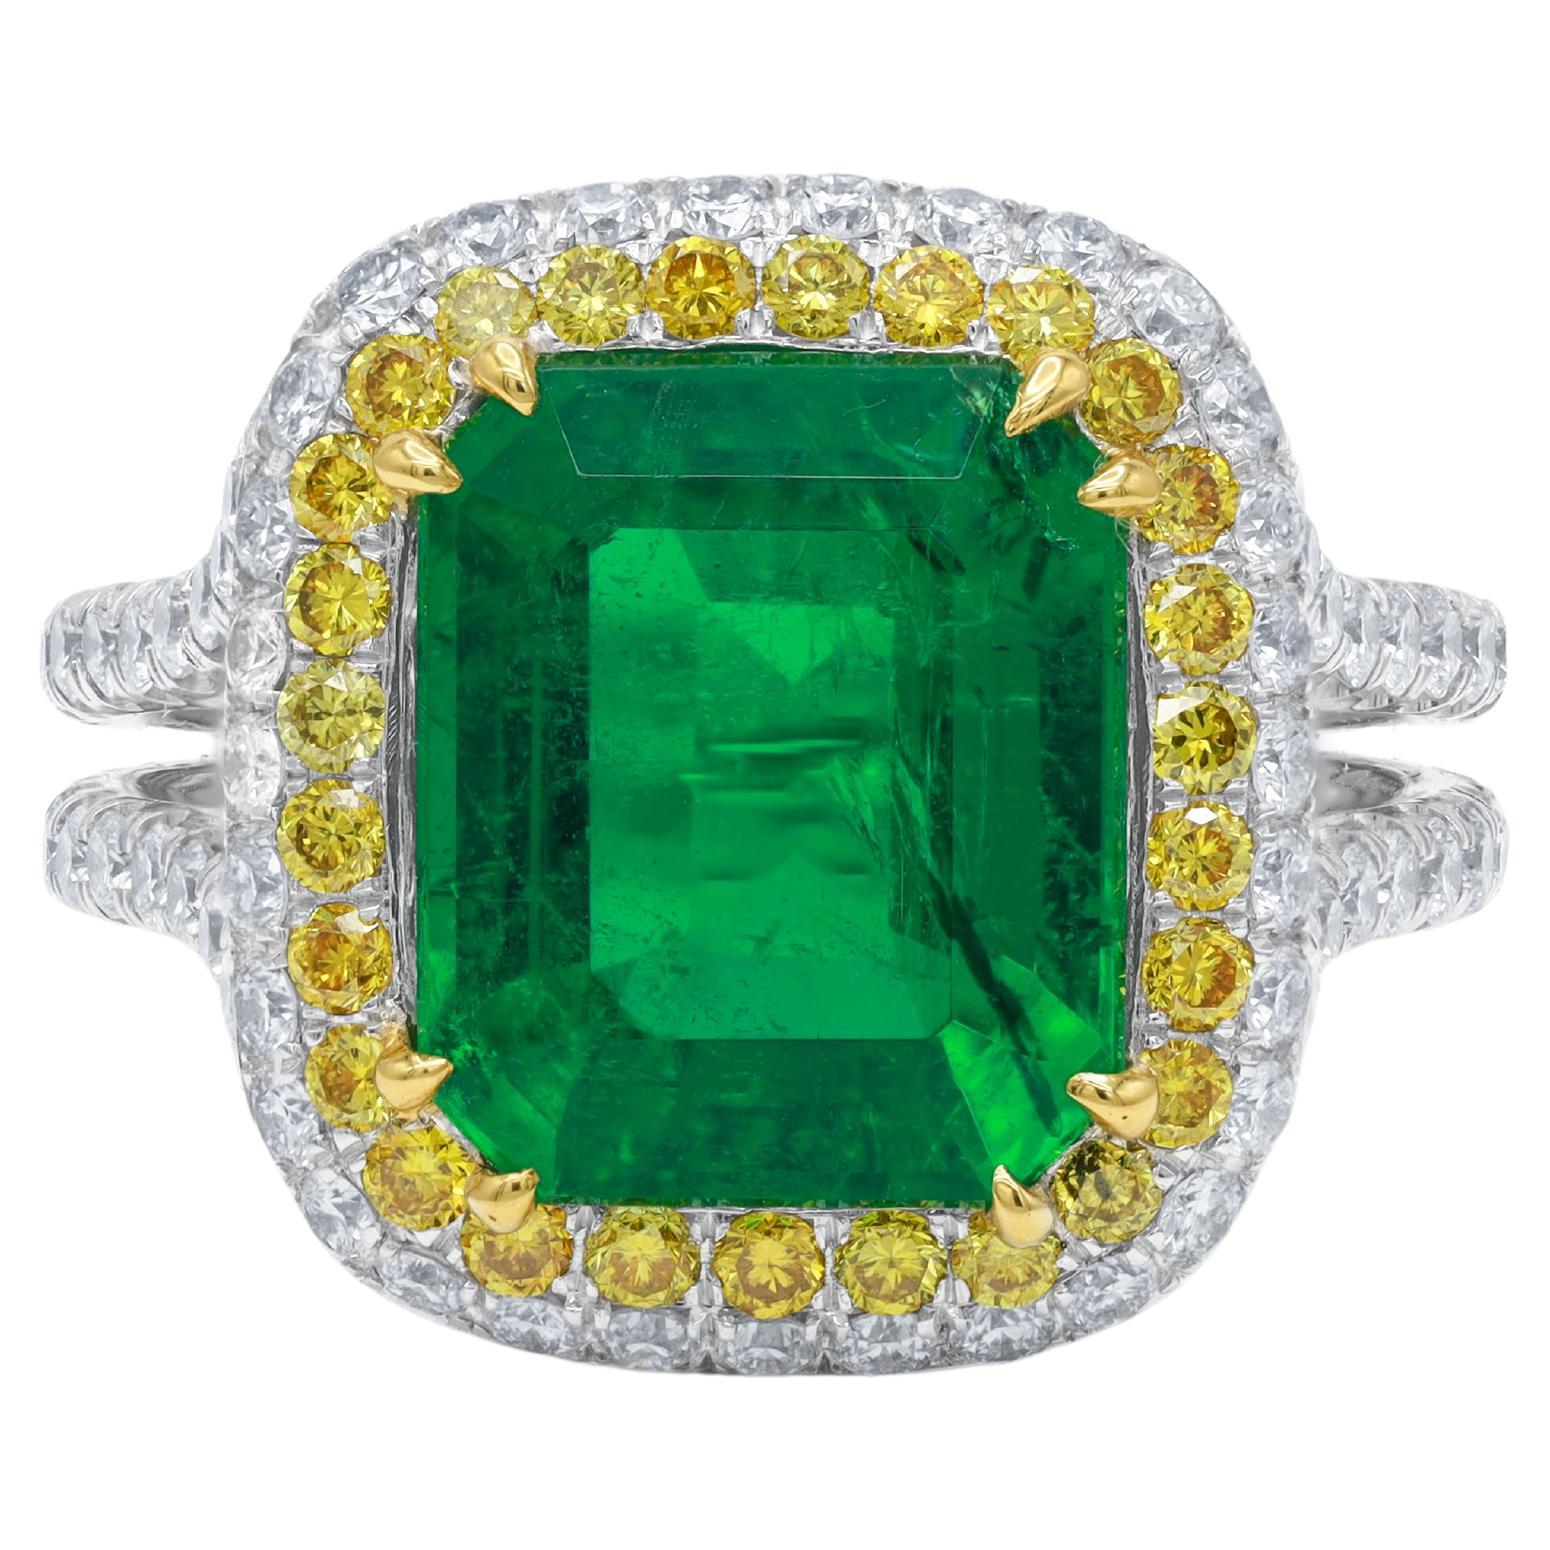 Diana M. 18kt White Gold Emerald Diamond Ring 3.97ct For Sale